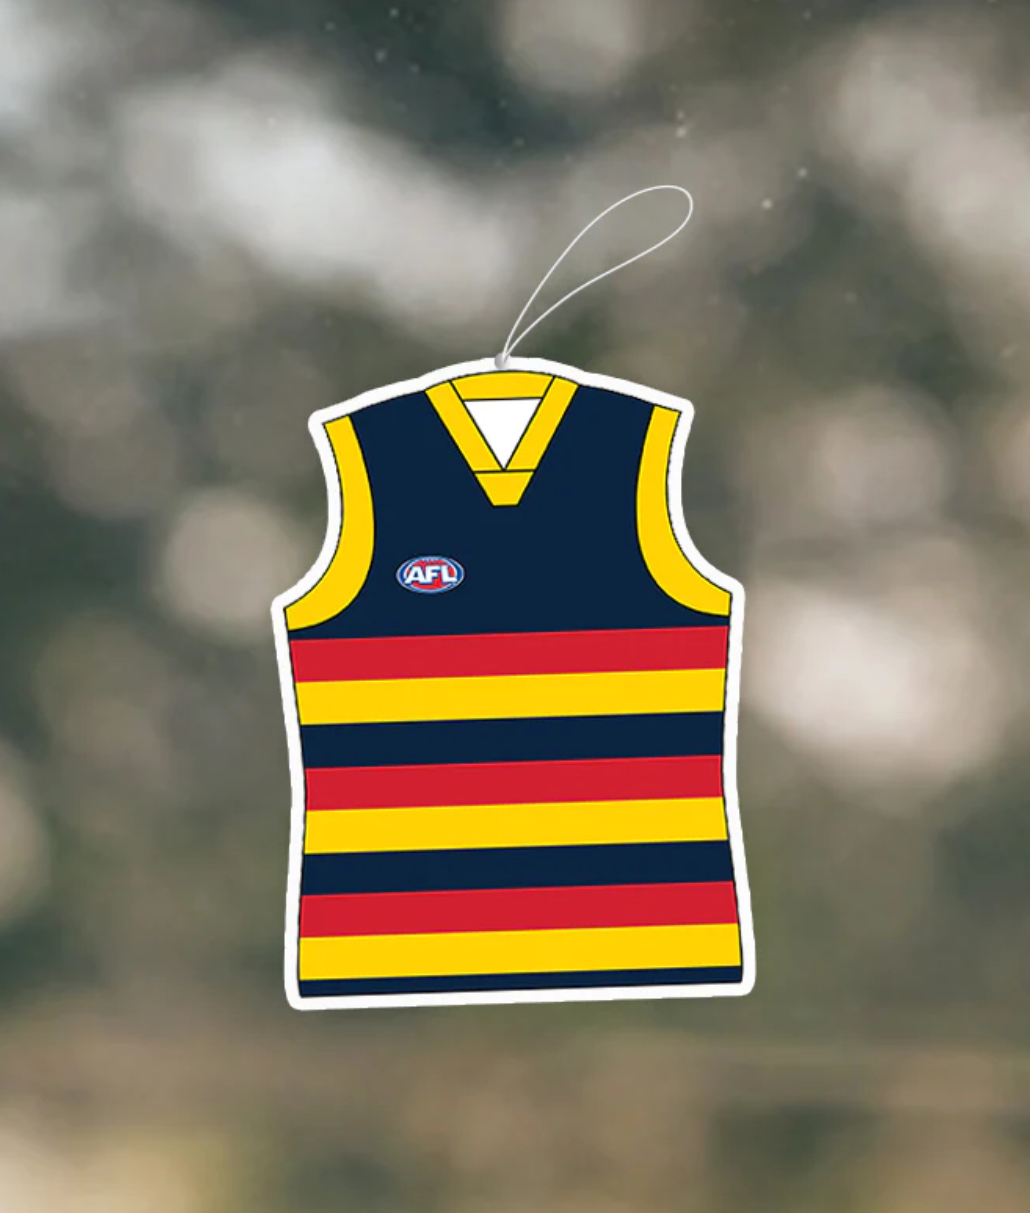 Adelaide Crows Bundle (8x Logo and 8x Guernsey Air Fresheners)